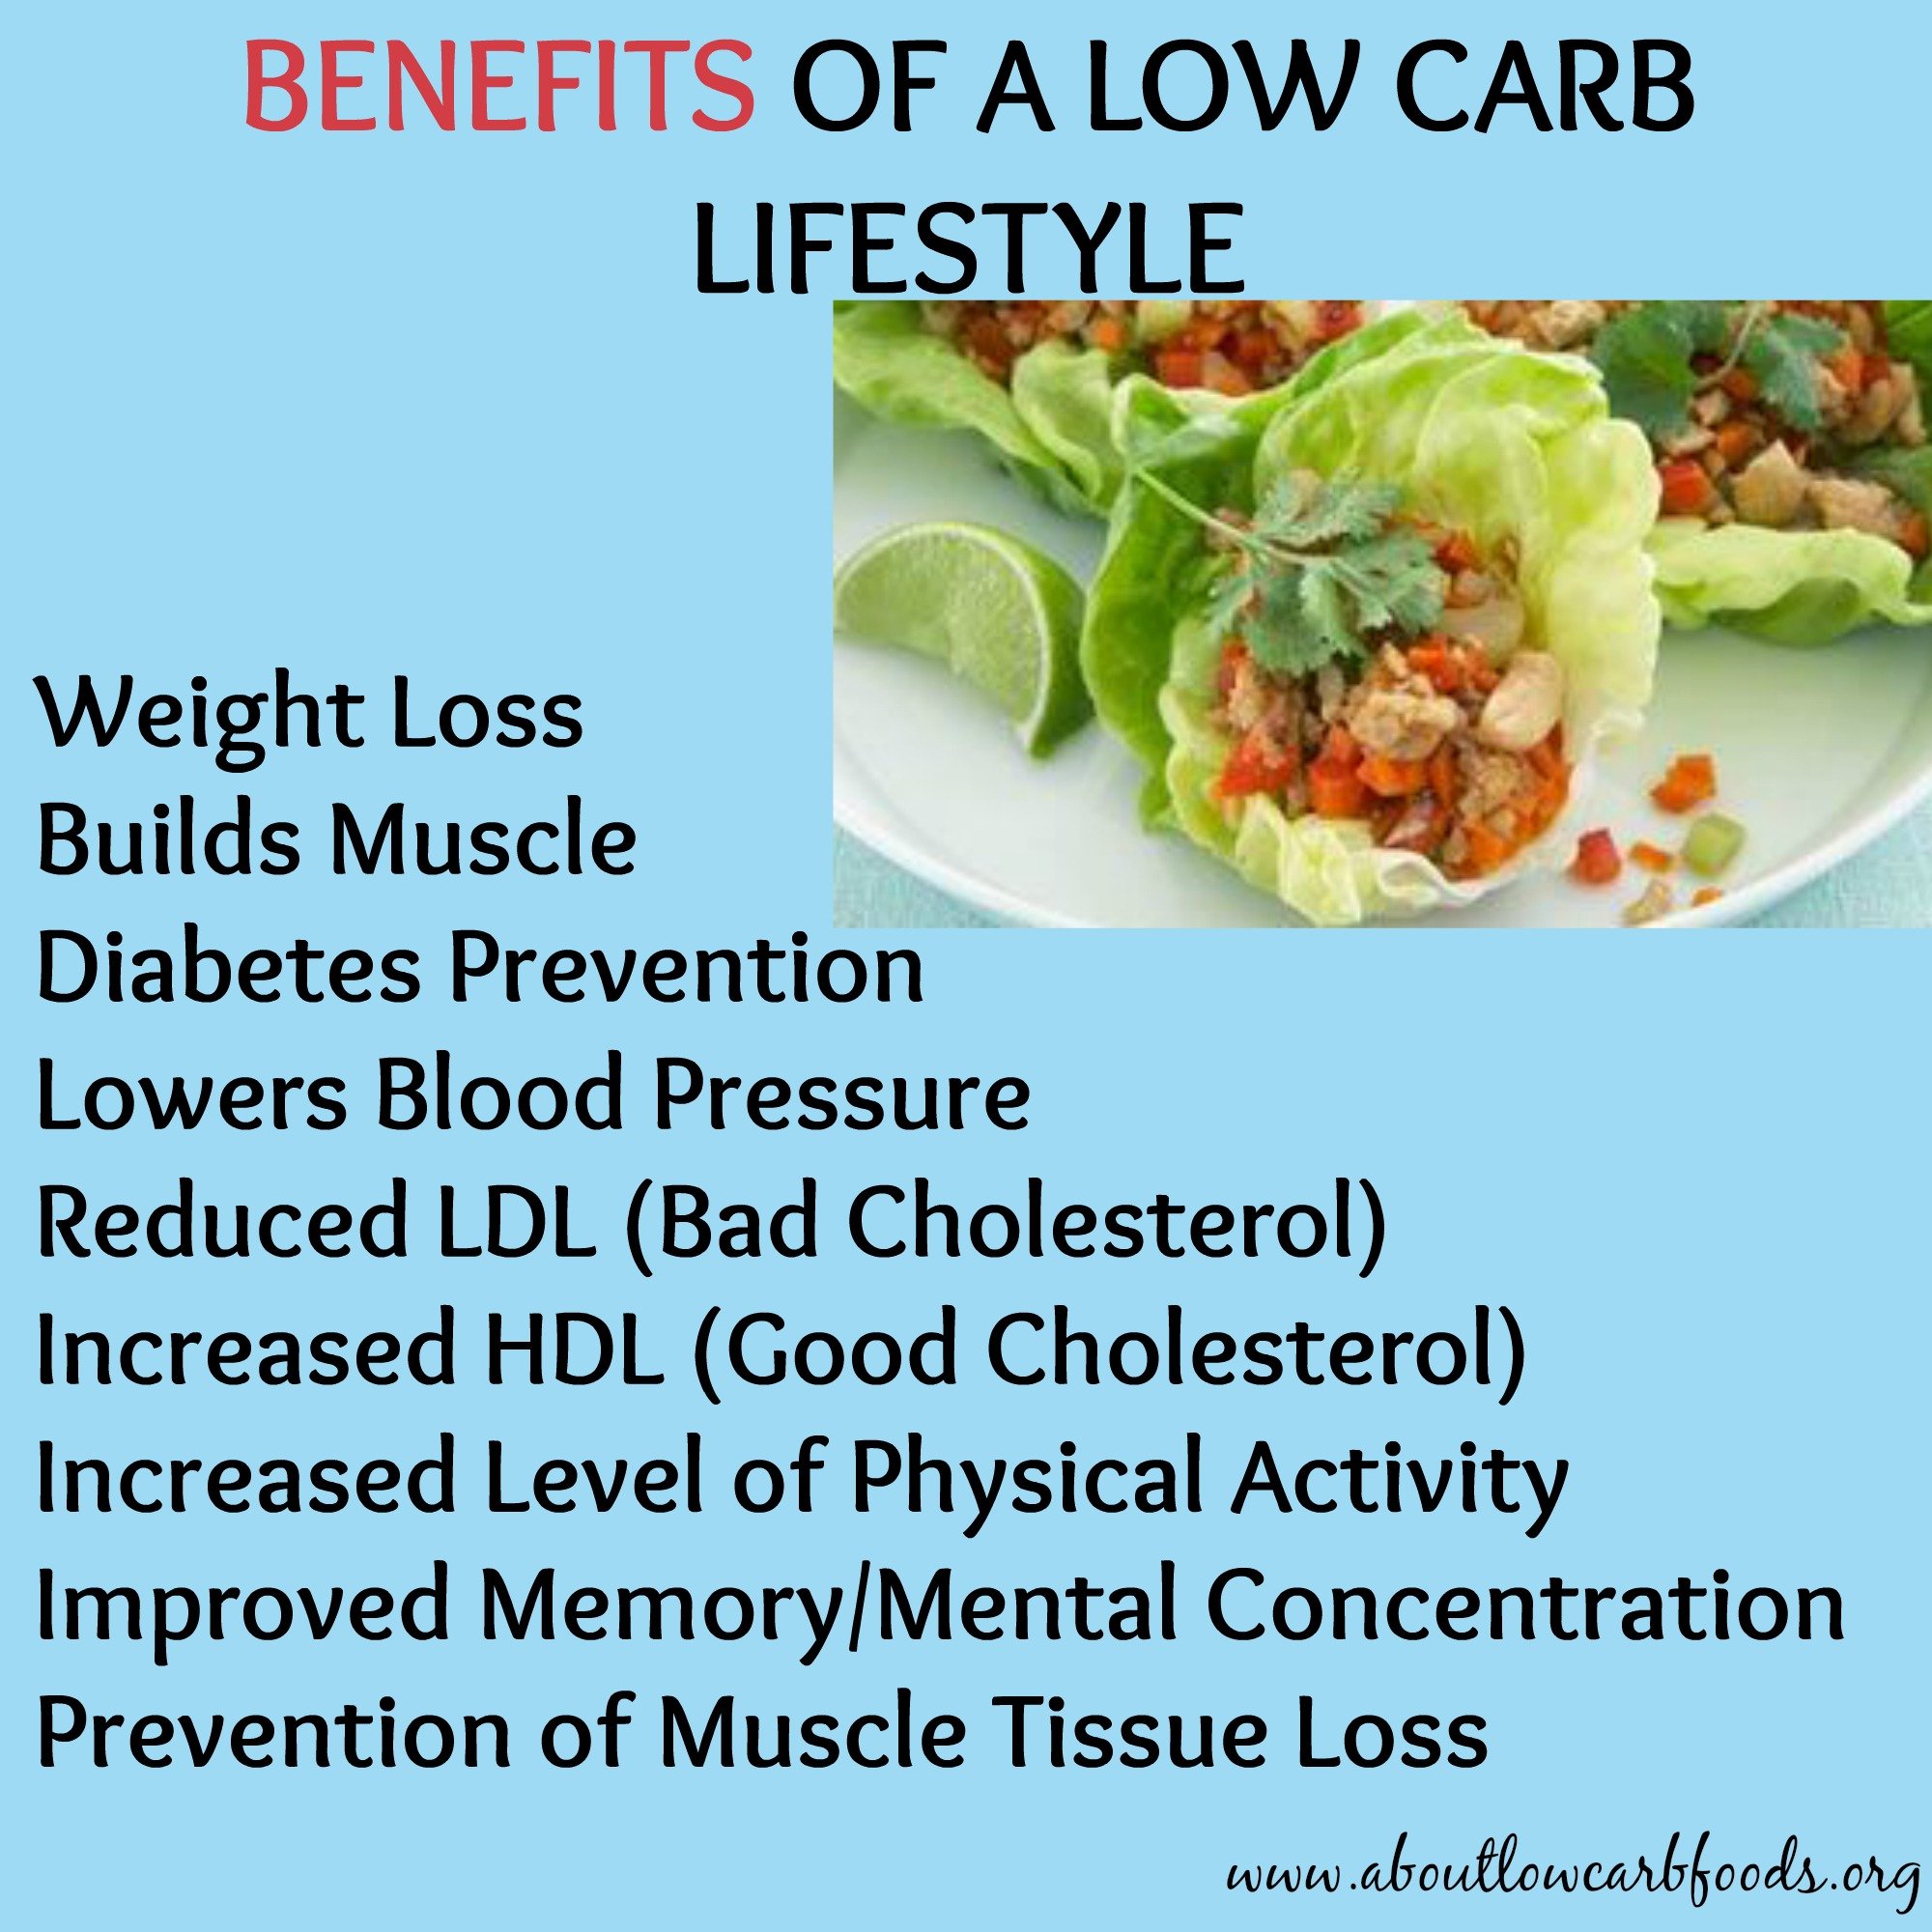 How Does A Low Carb Diet Work? A Detailed Review